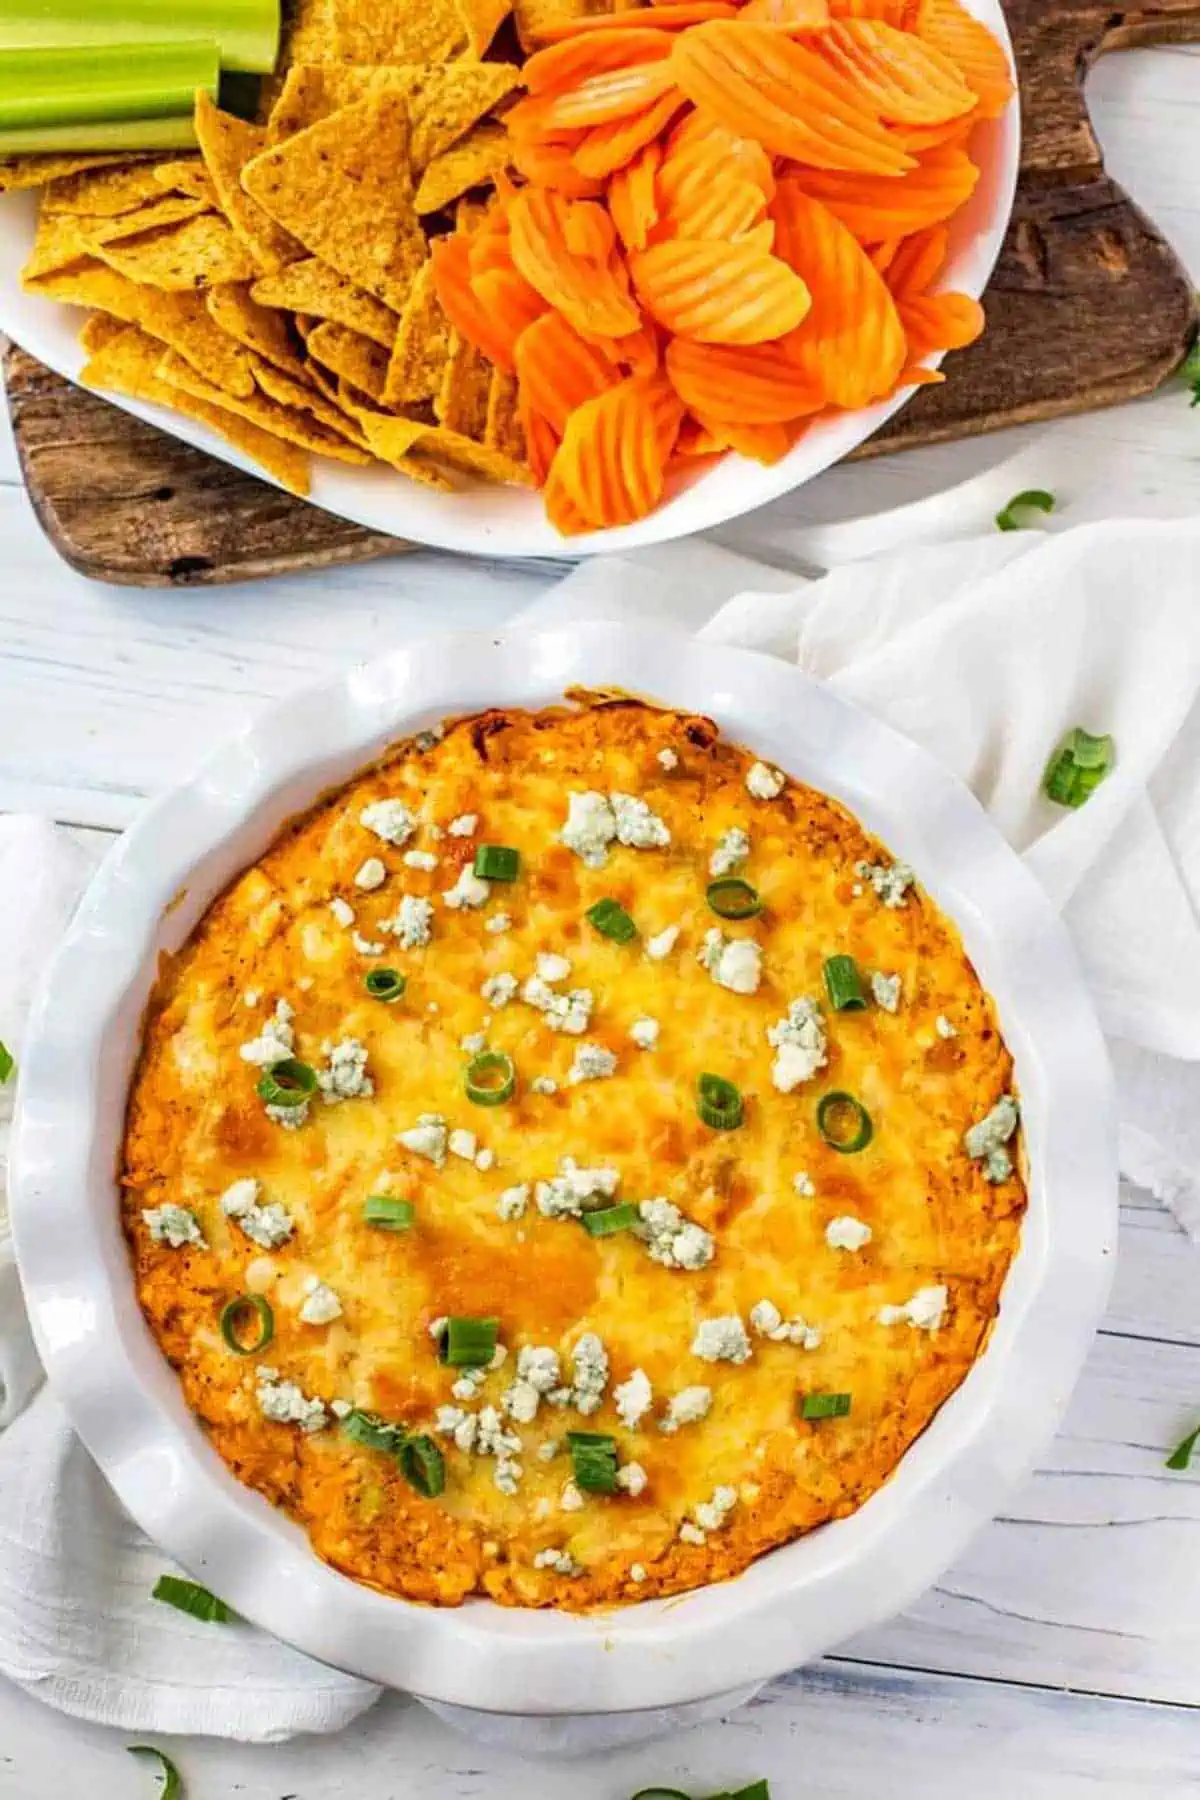 Photo of a Healthy Buffalo Chicken Dip in a white pie plate garnished with blue cheese and scallions. Another plate of carrots, celery and chips are behind it.